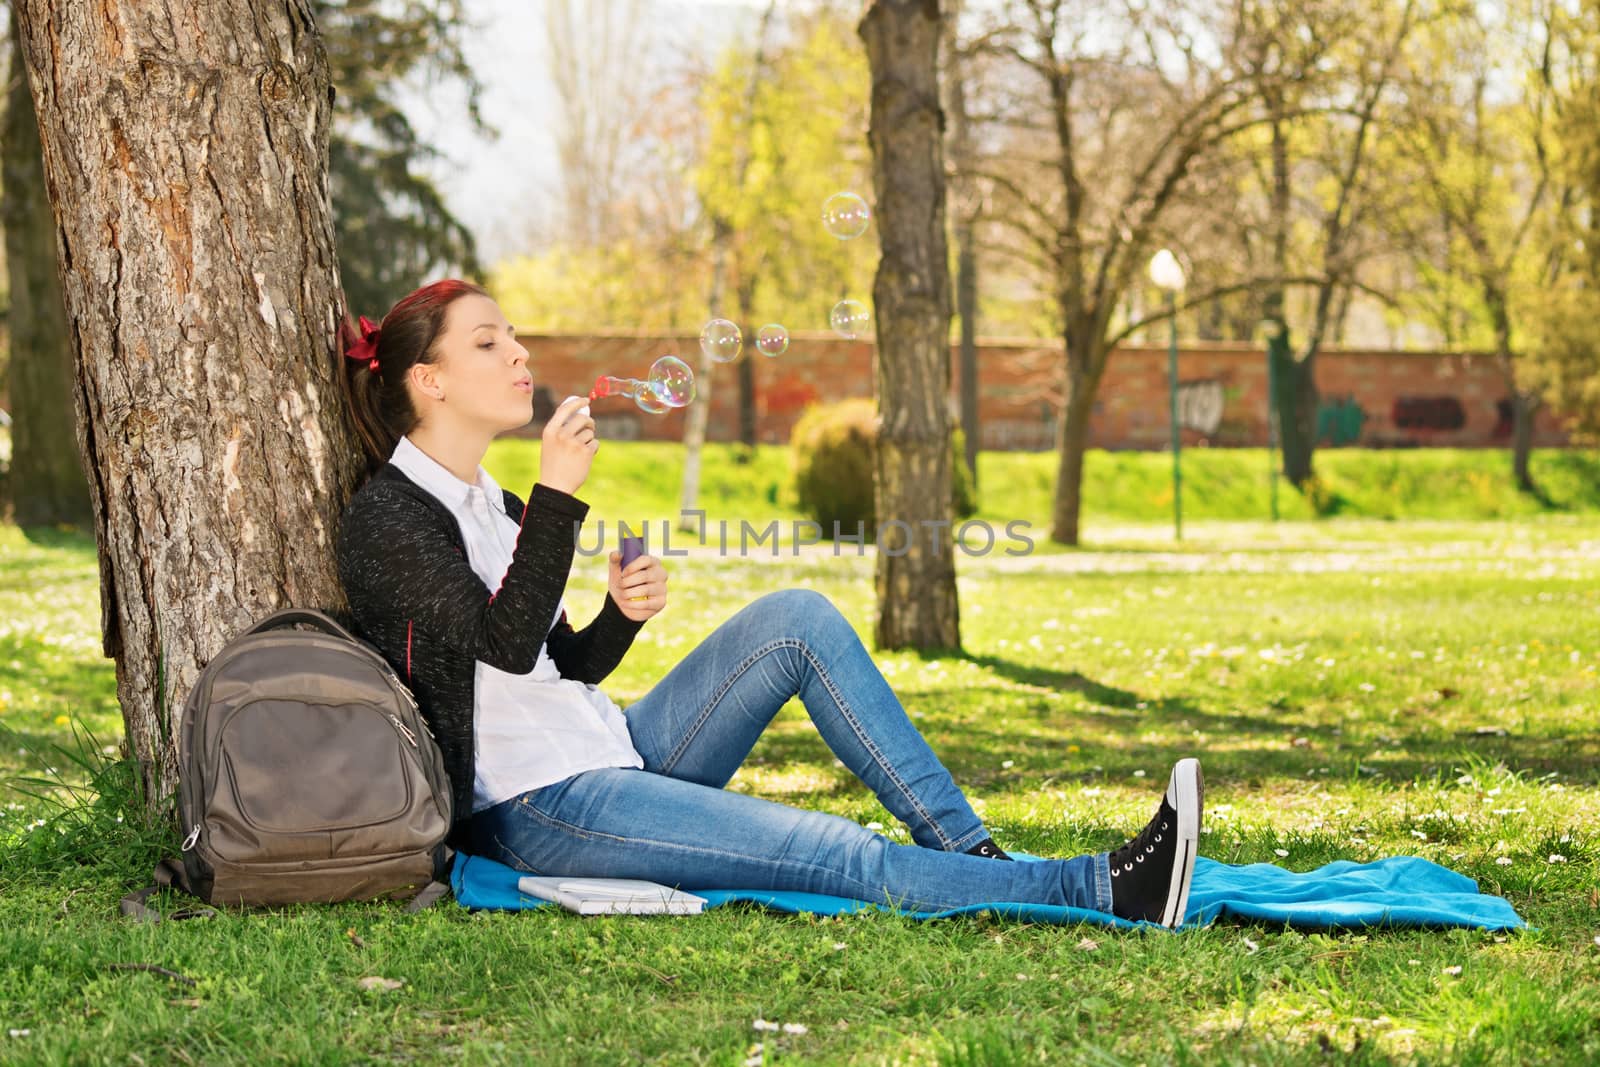 Blowing soap bubbles in the park. Beautiful young student girl leaning on a tree in a meadow blowing soap bubbles, taking a break from studying.